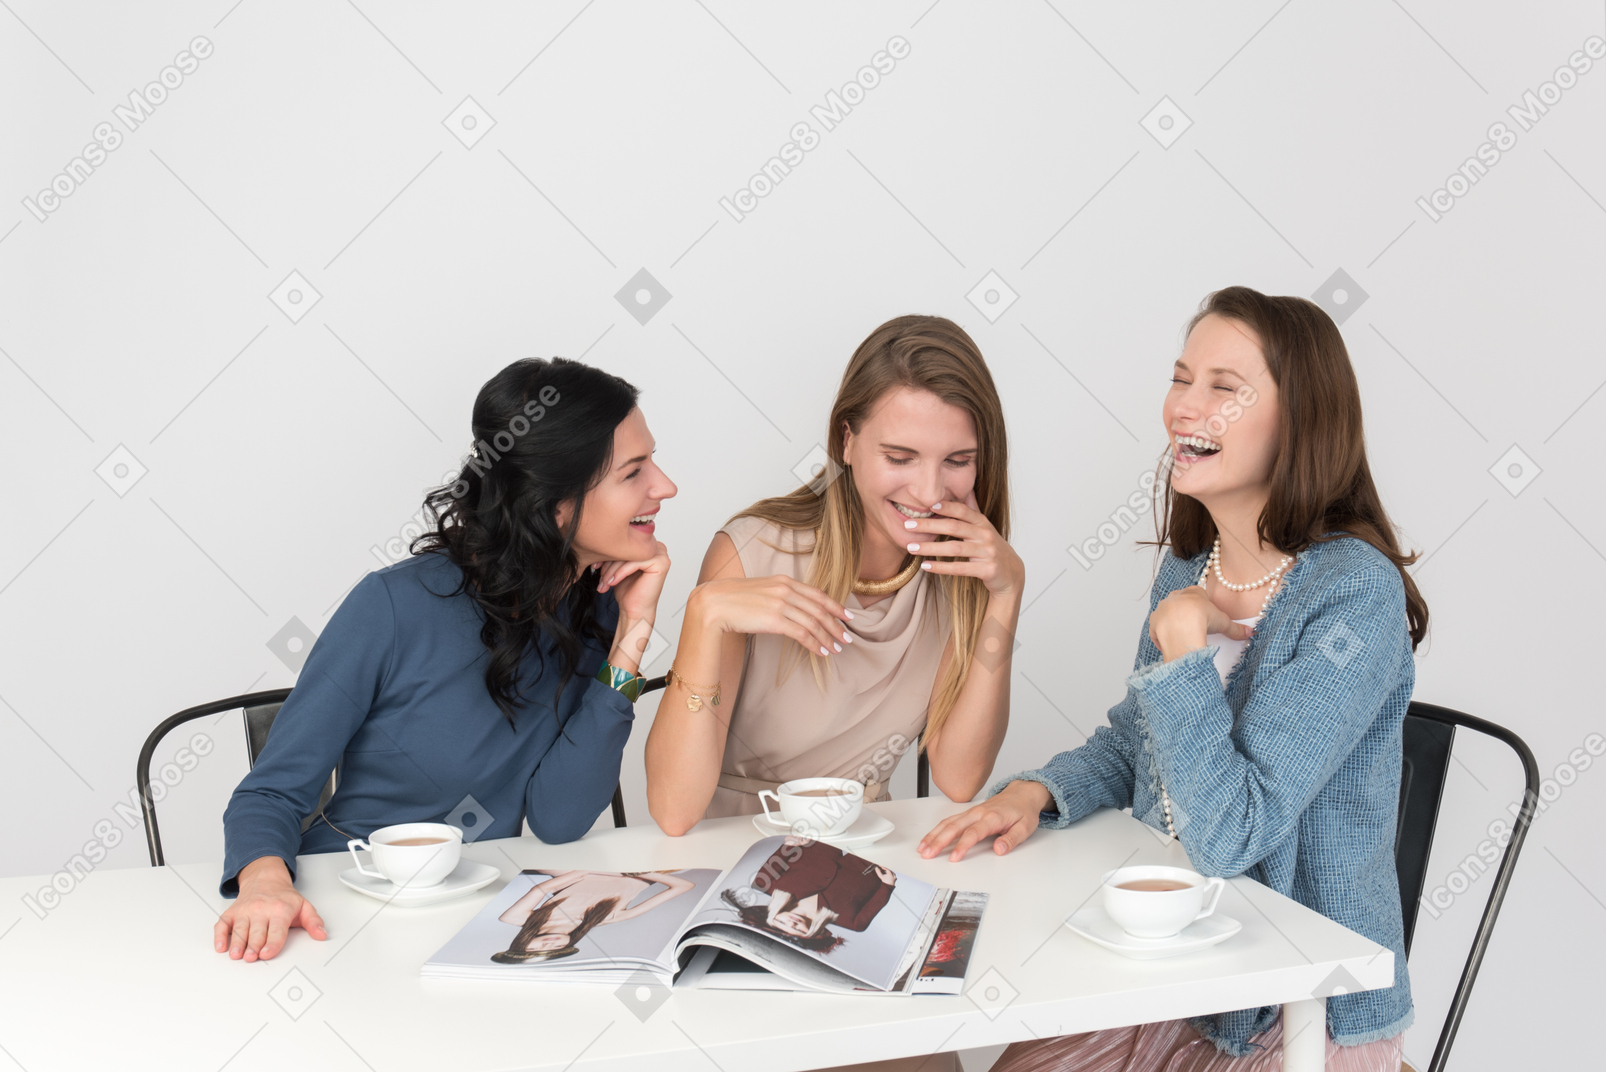 Having coffee with my girls is always so much fun